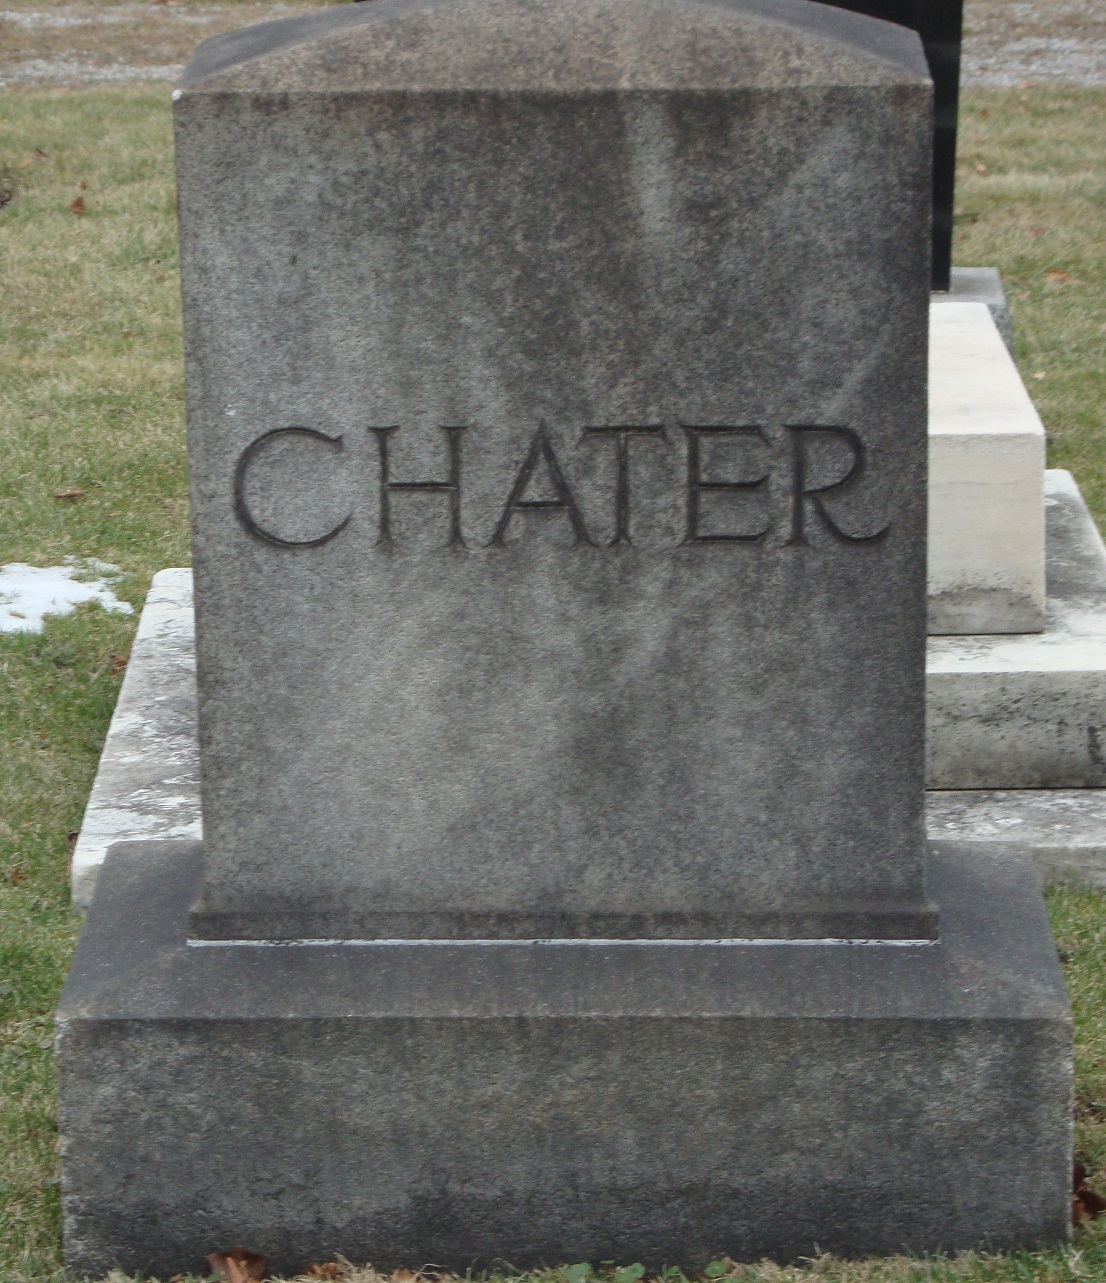 CHATER - Sect B Row 3